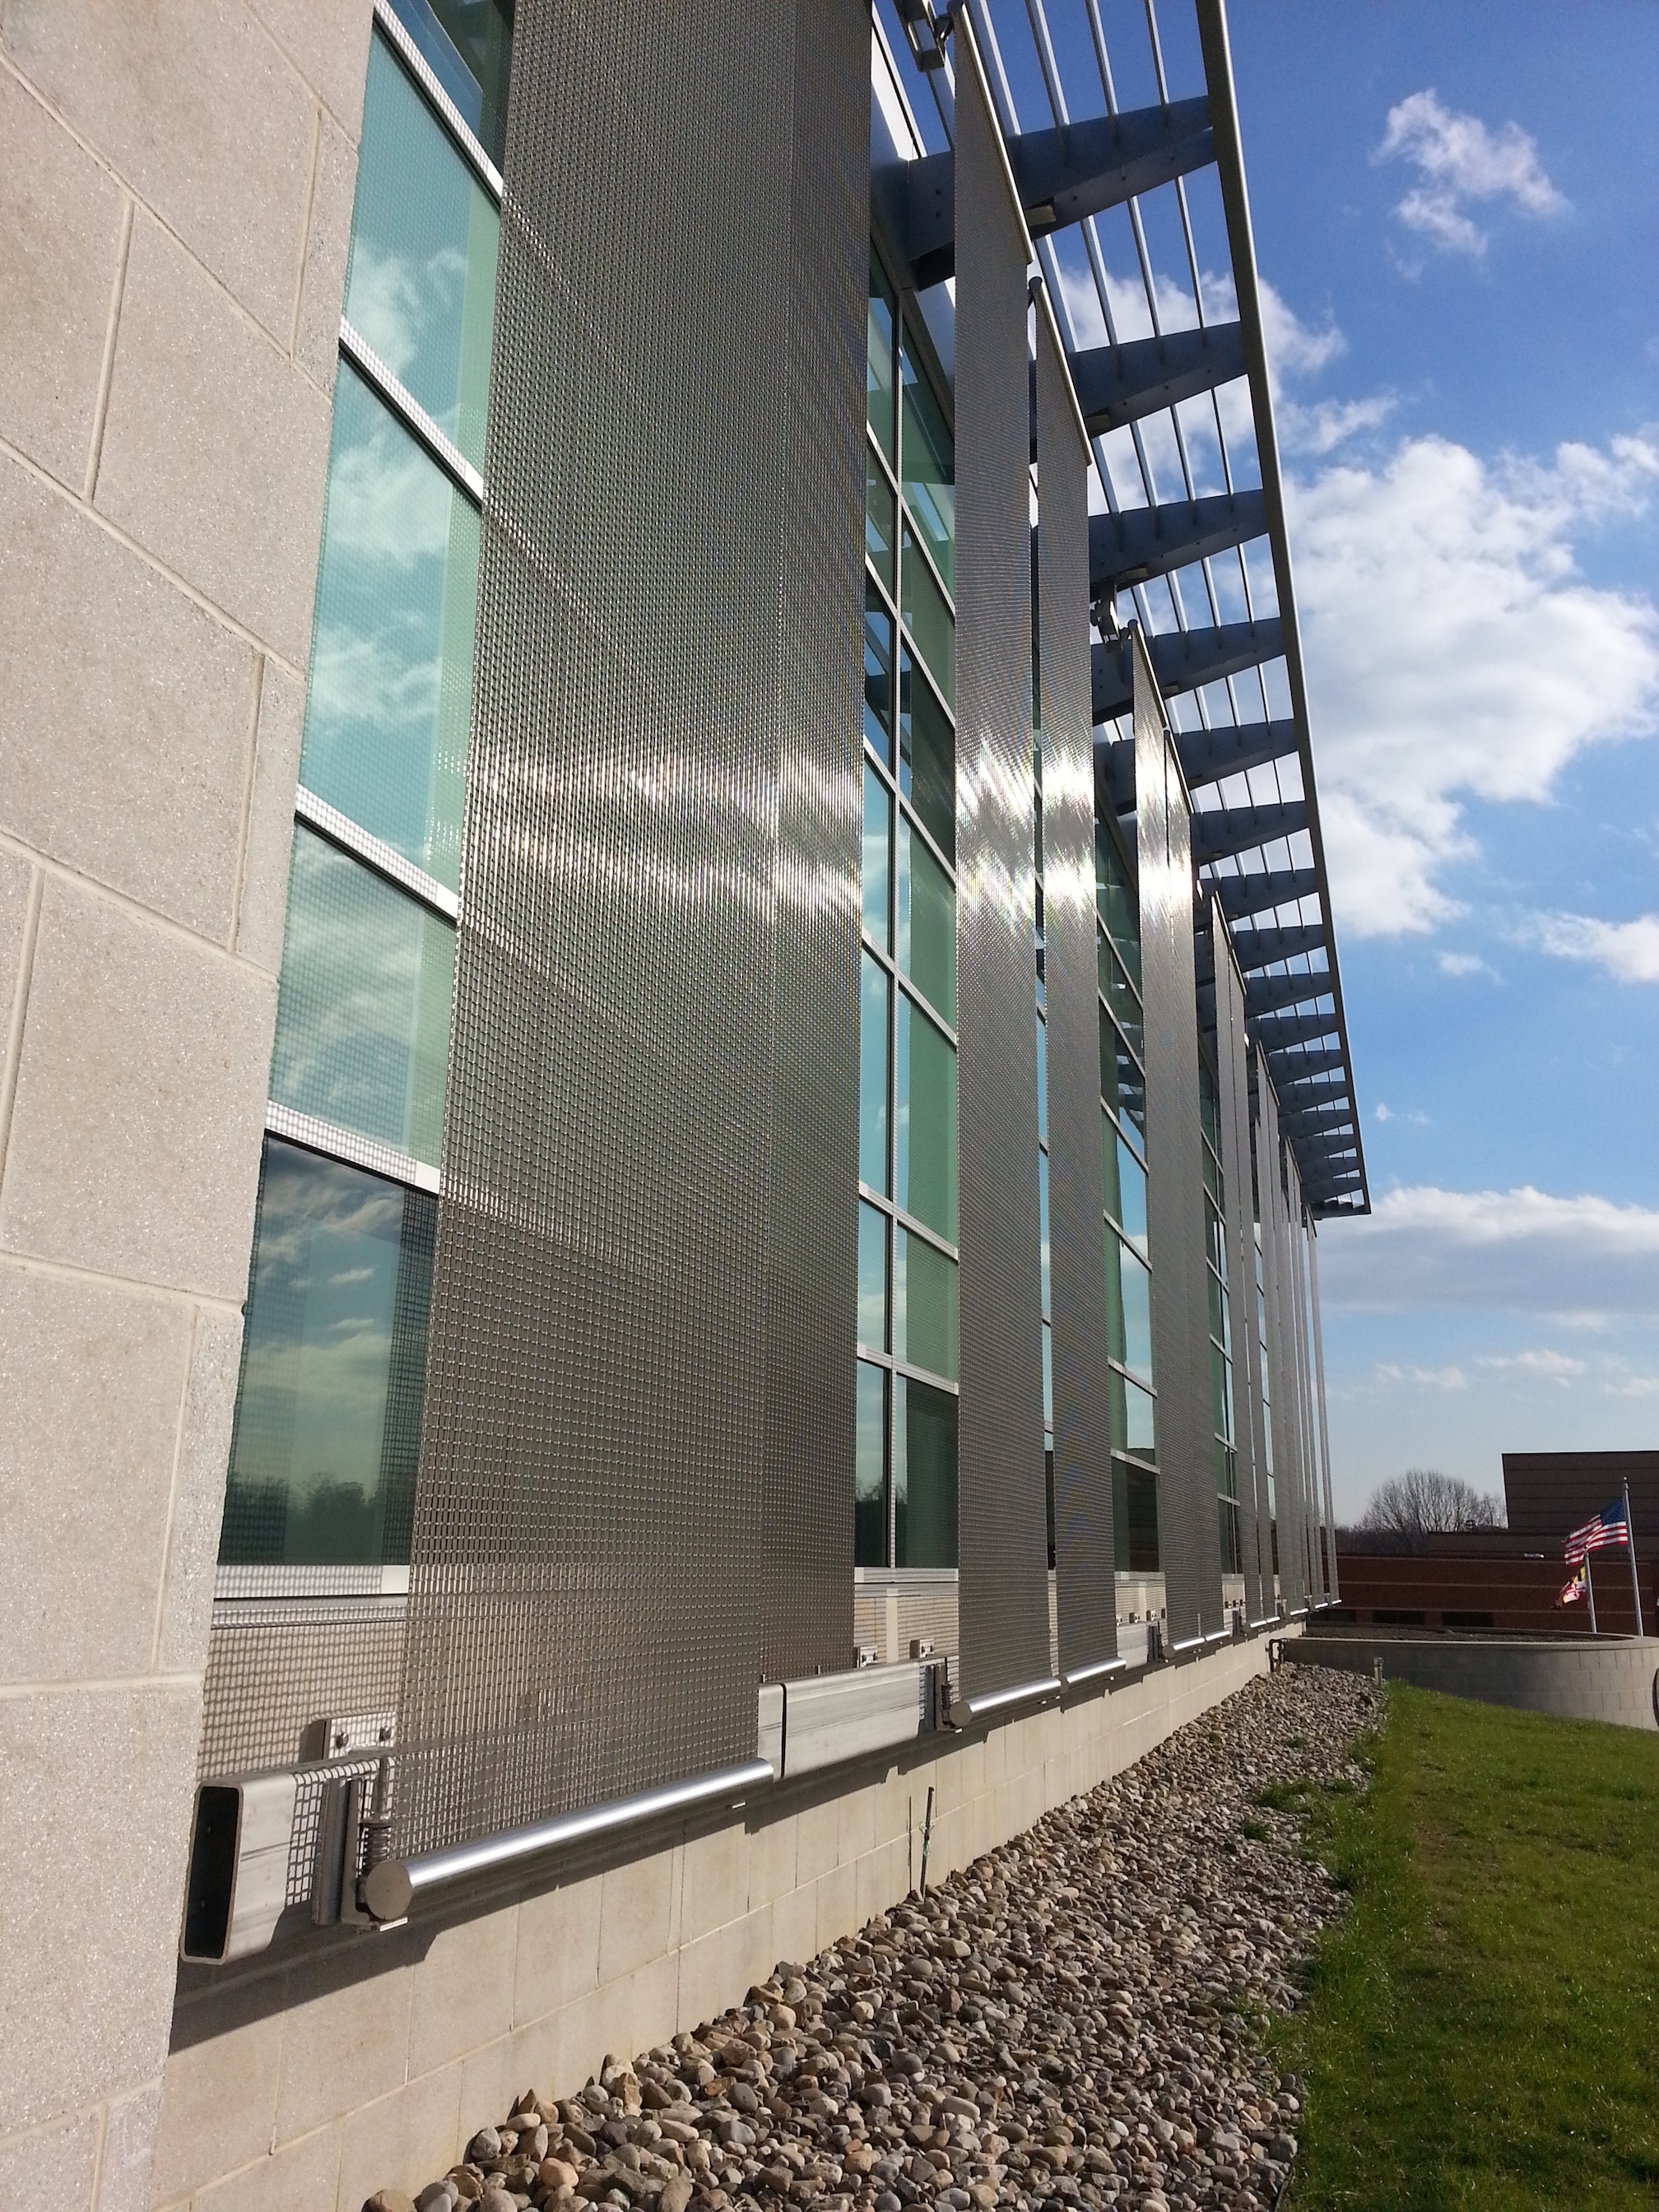 Cambridge Architectural Cubist mesh sunscreens create a dramatic visual effect while providing solar shading for the building’s west-facing glass curtain wall.